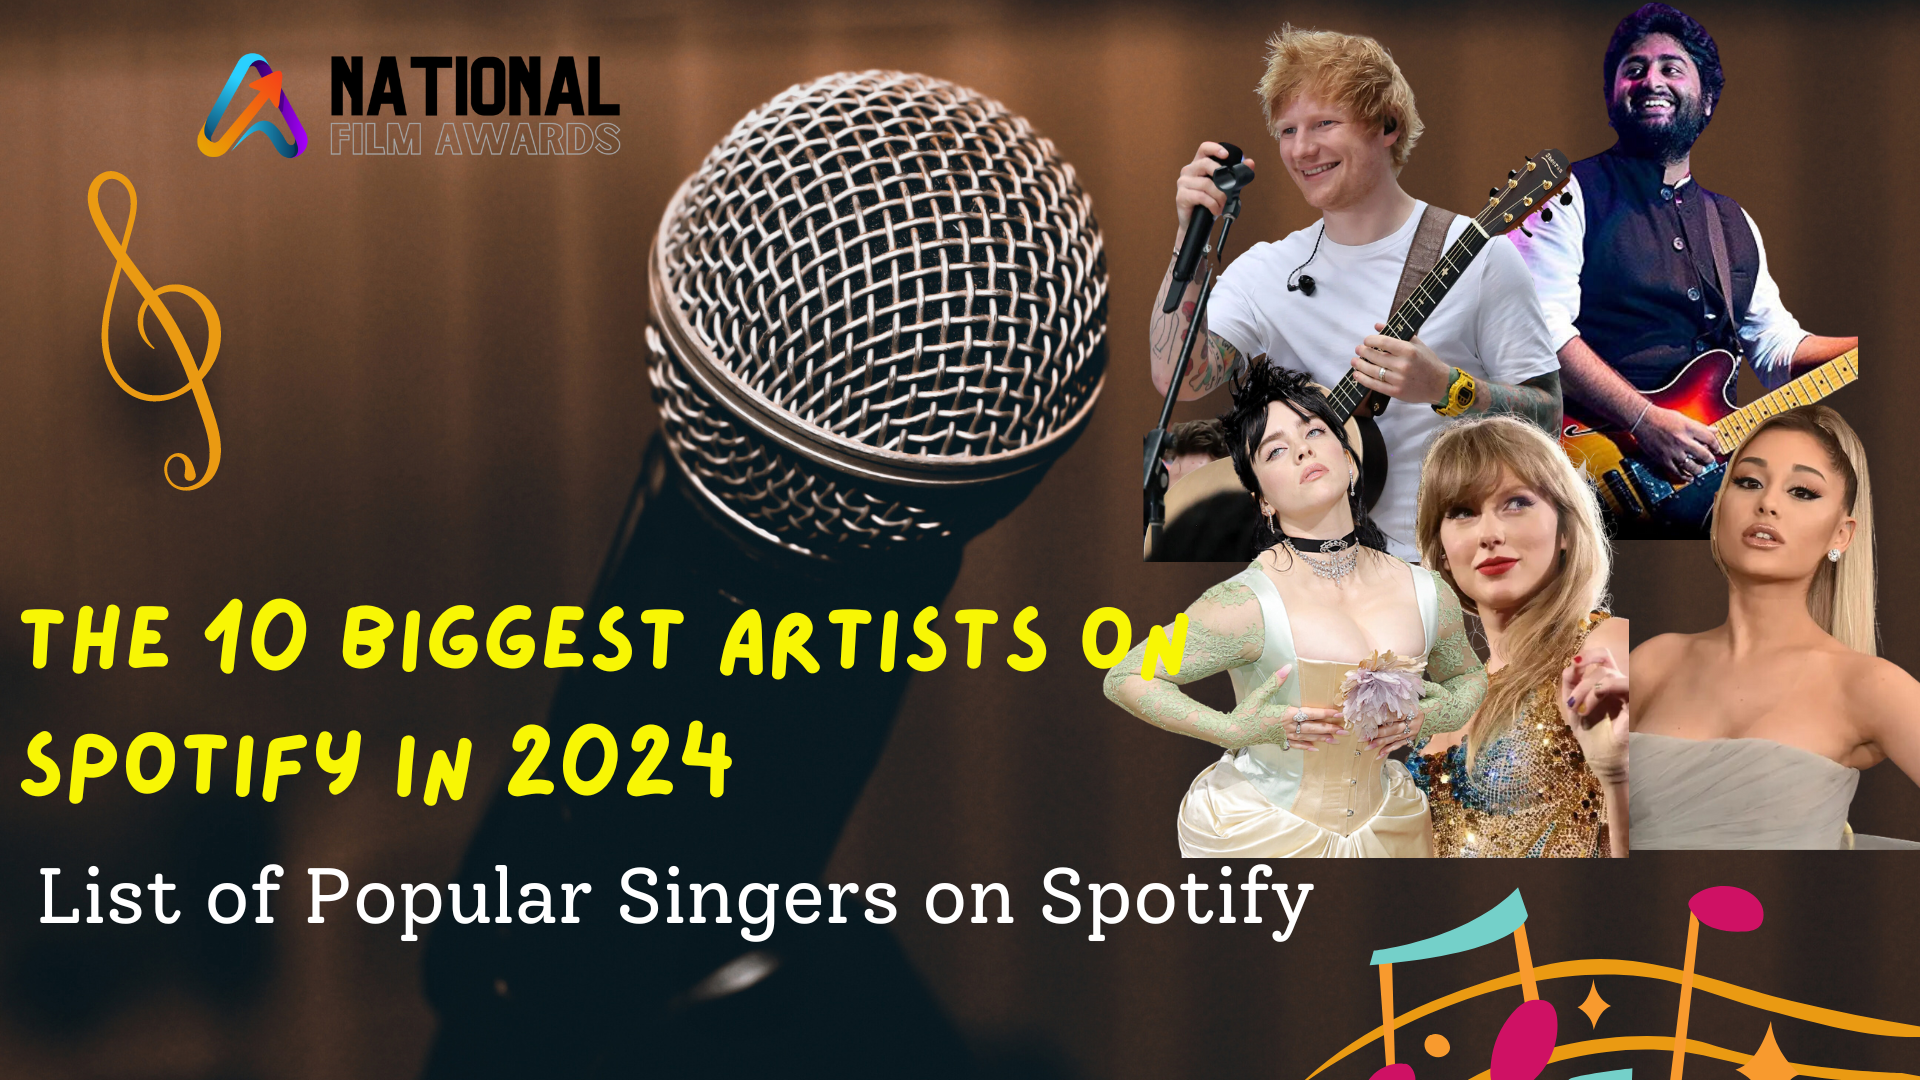 The 10 Biggest Artists on Spotify in 2024: List of Popular Singers on Spotify